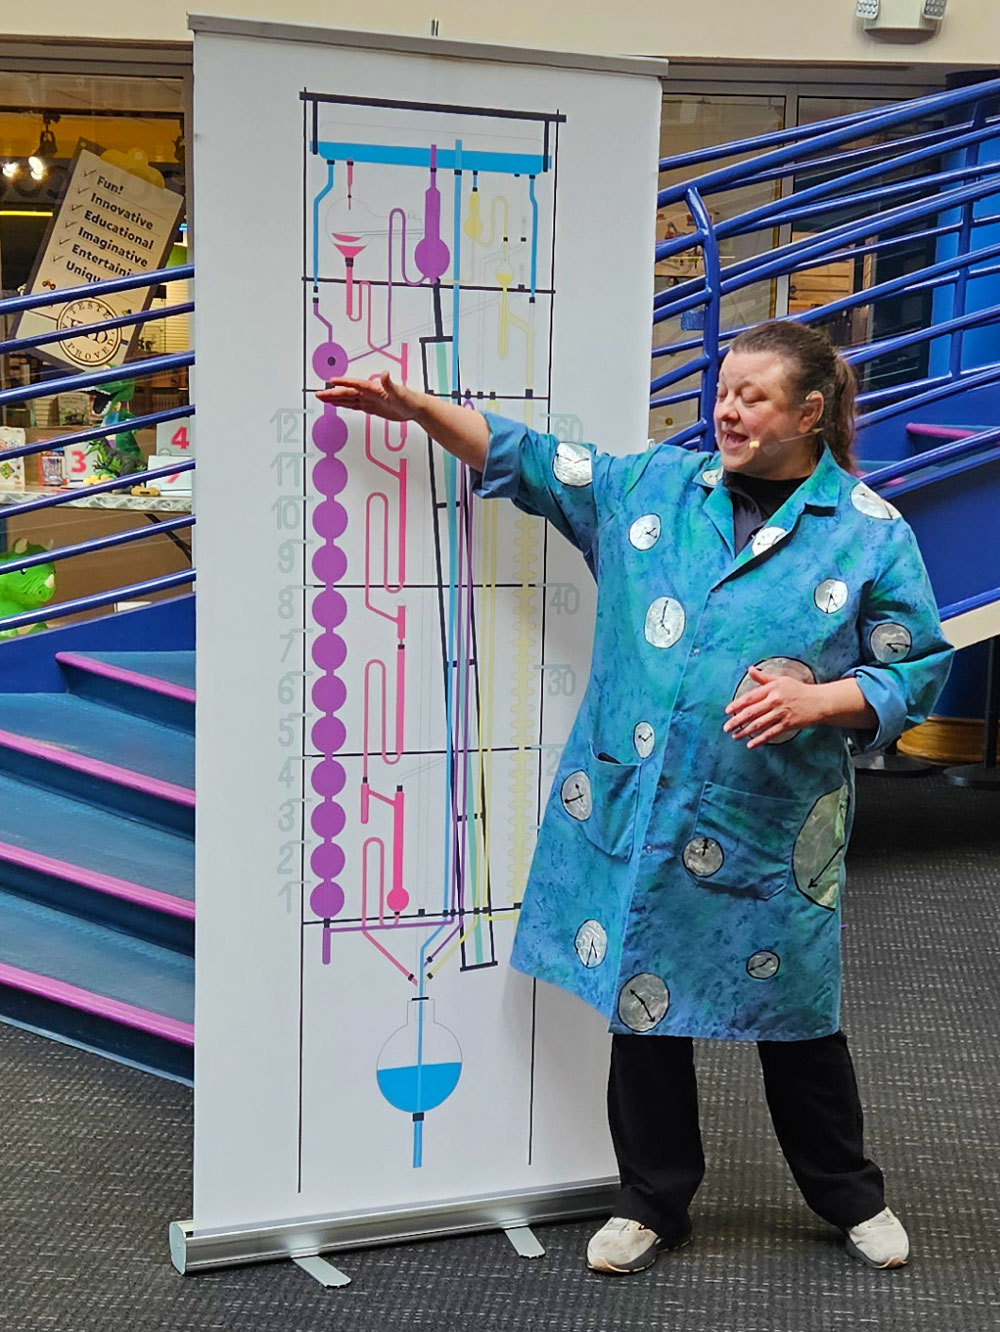 Staff member explaining a large diagram of the Water Clock.